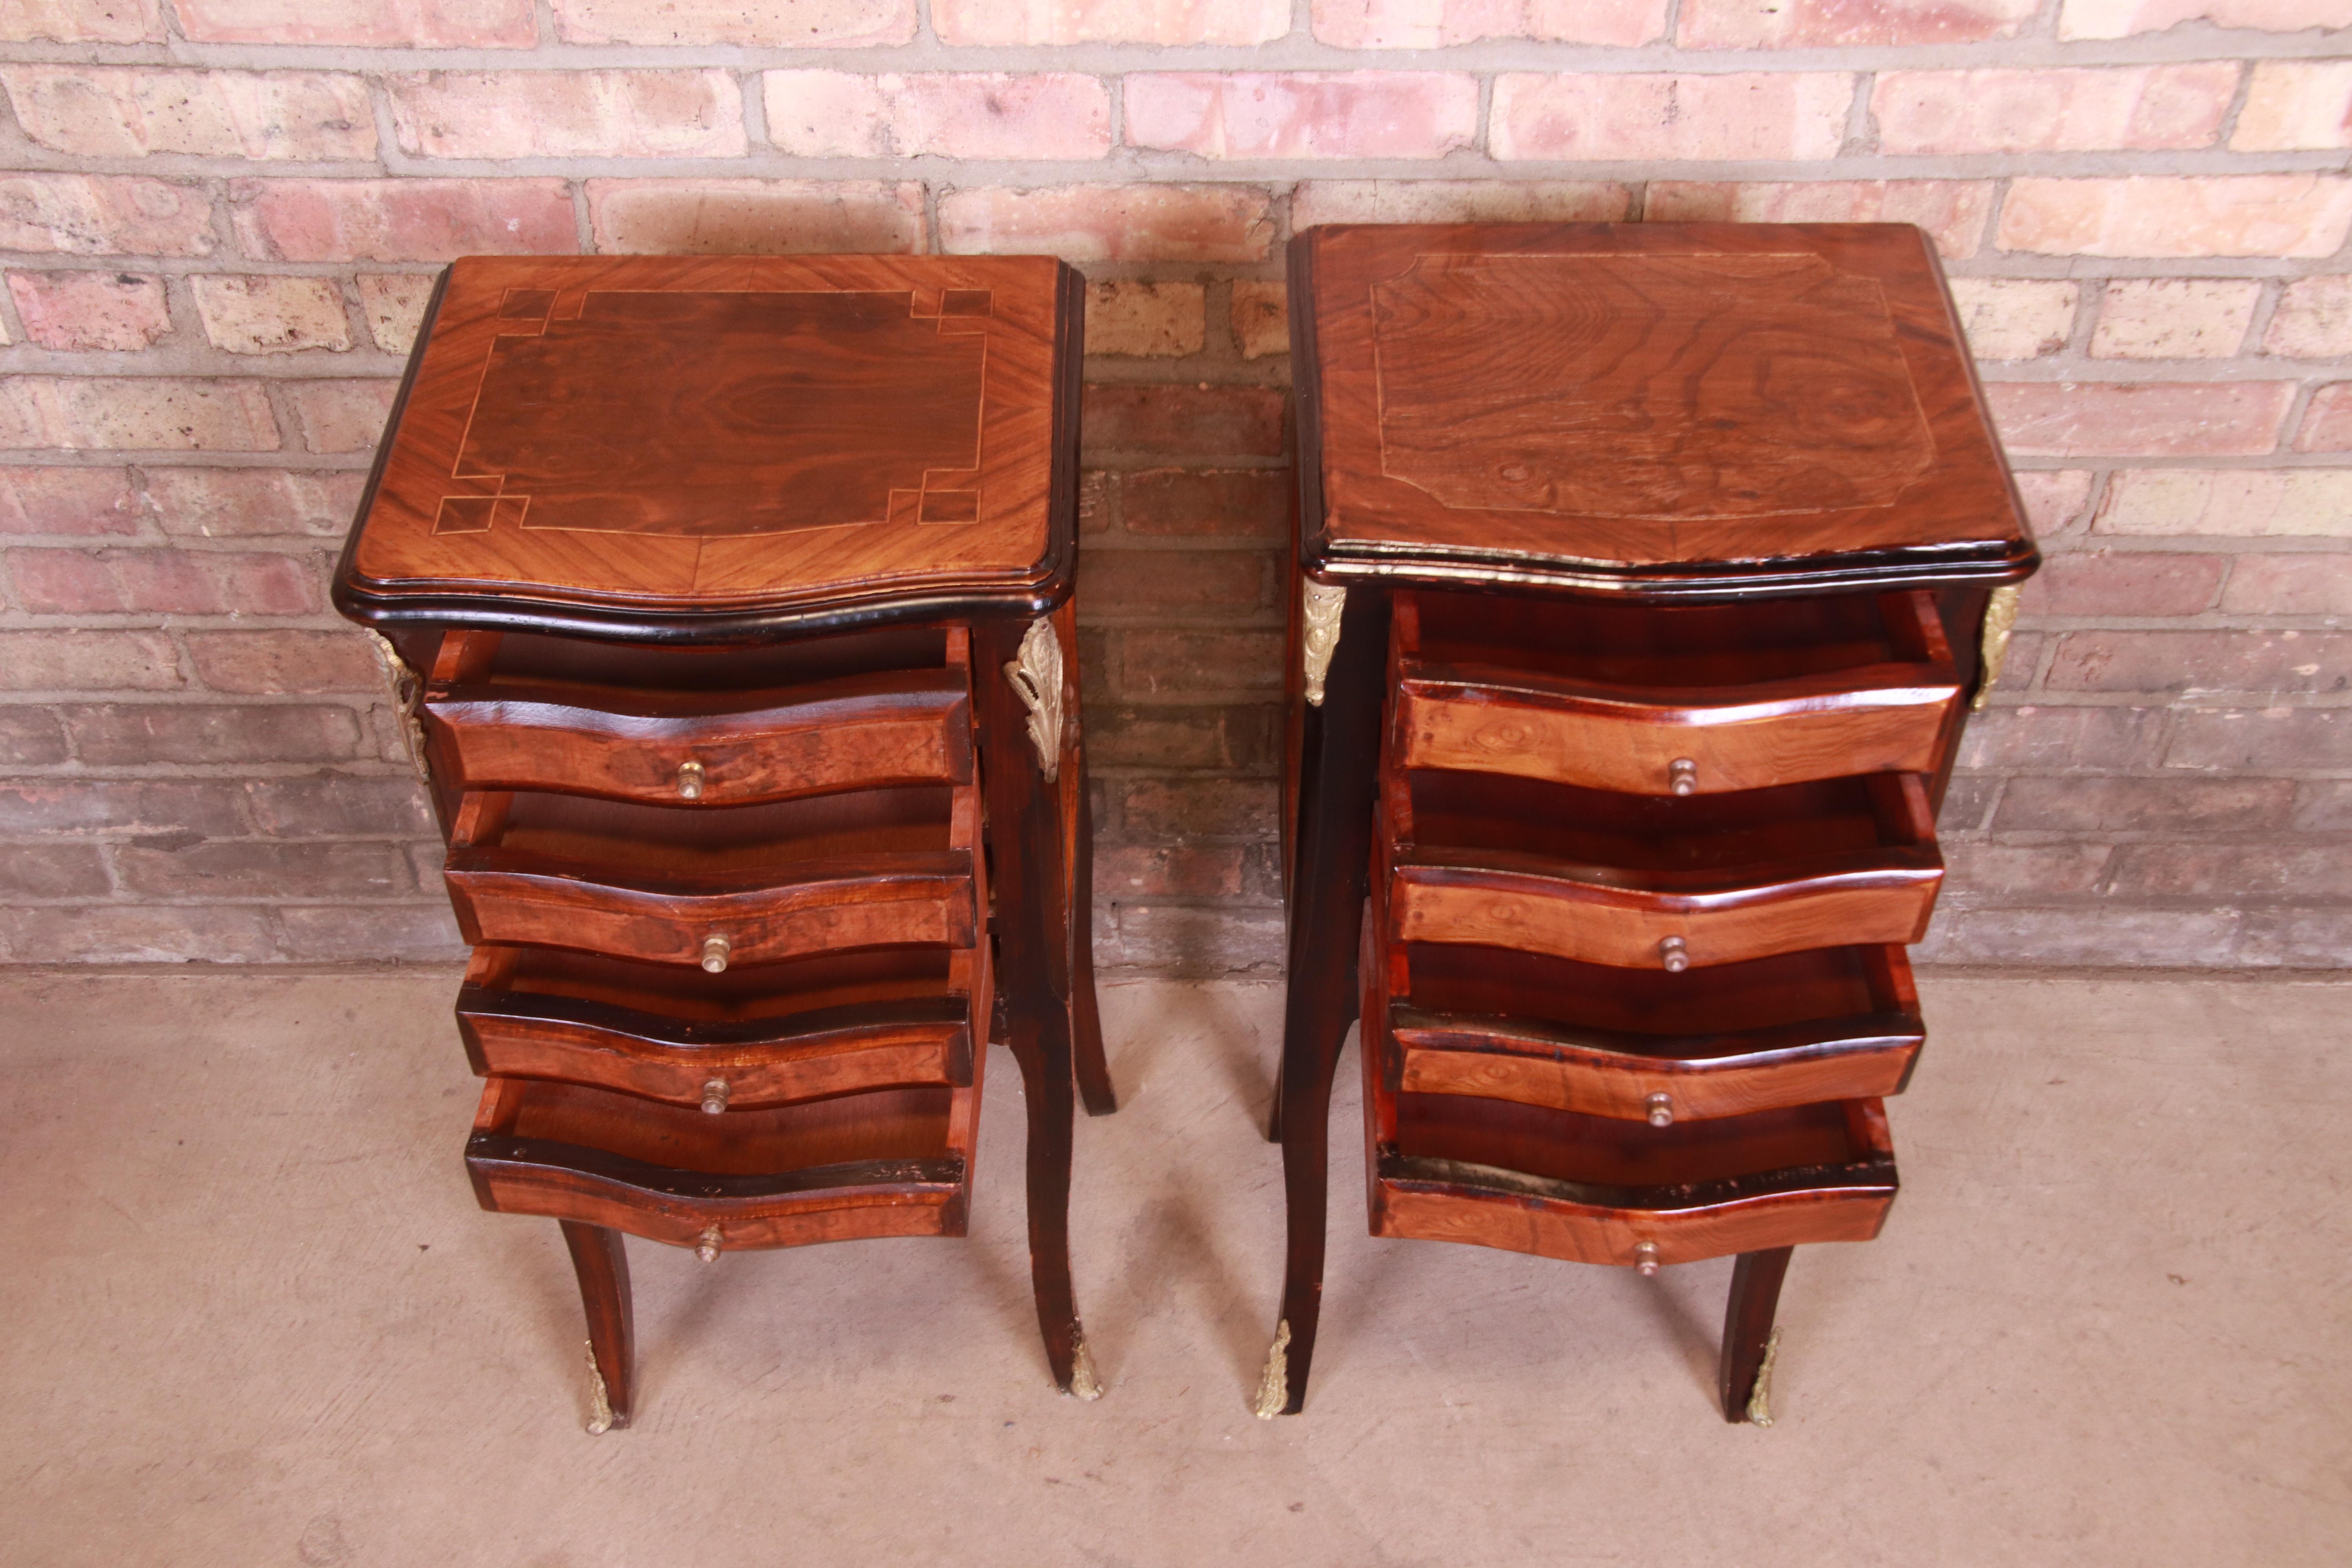 Petite French Provincial Louis XV Mahogany and Burl Wood Nightstands, Pair For Sale 4